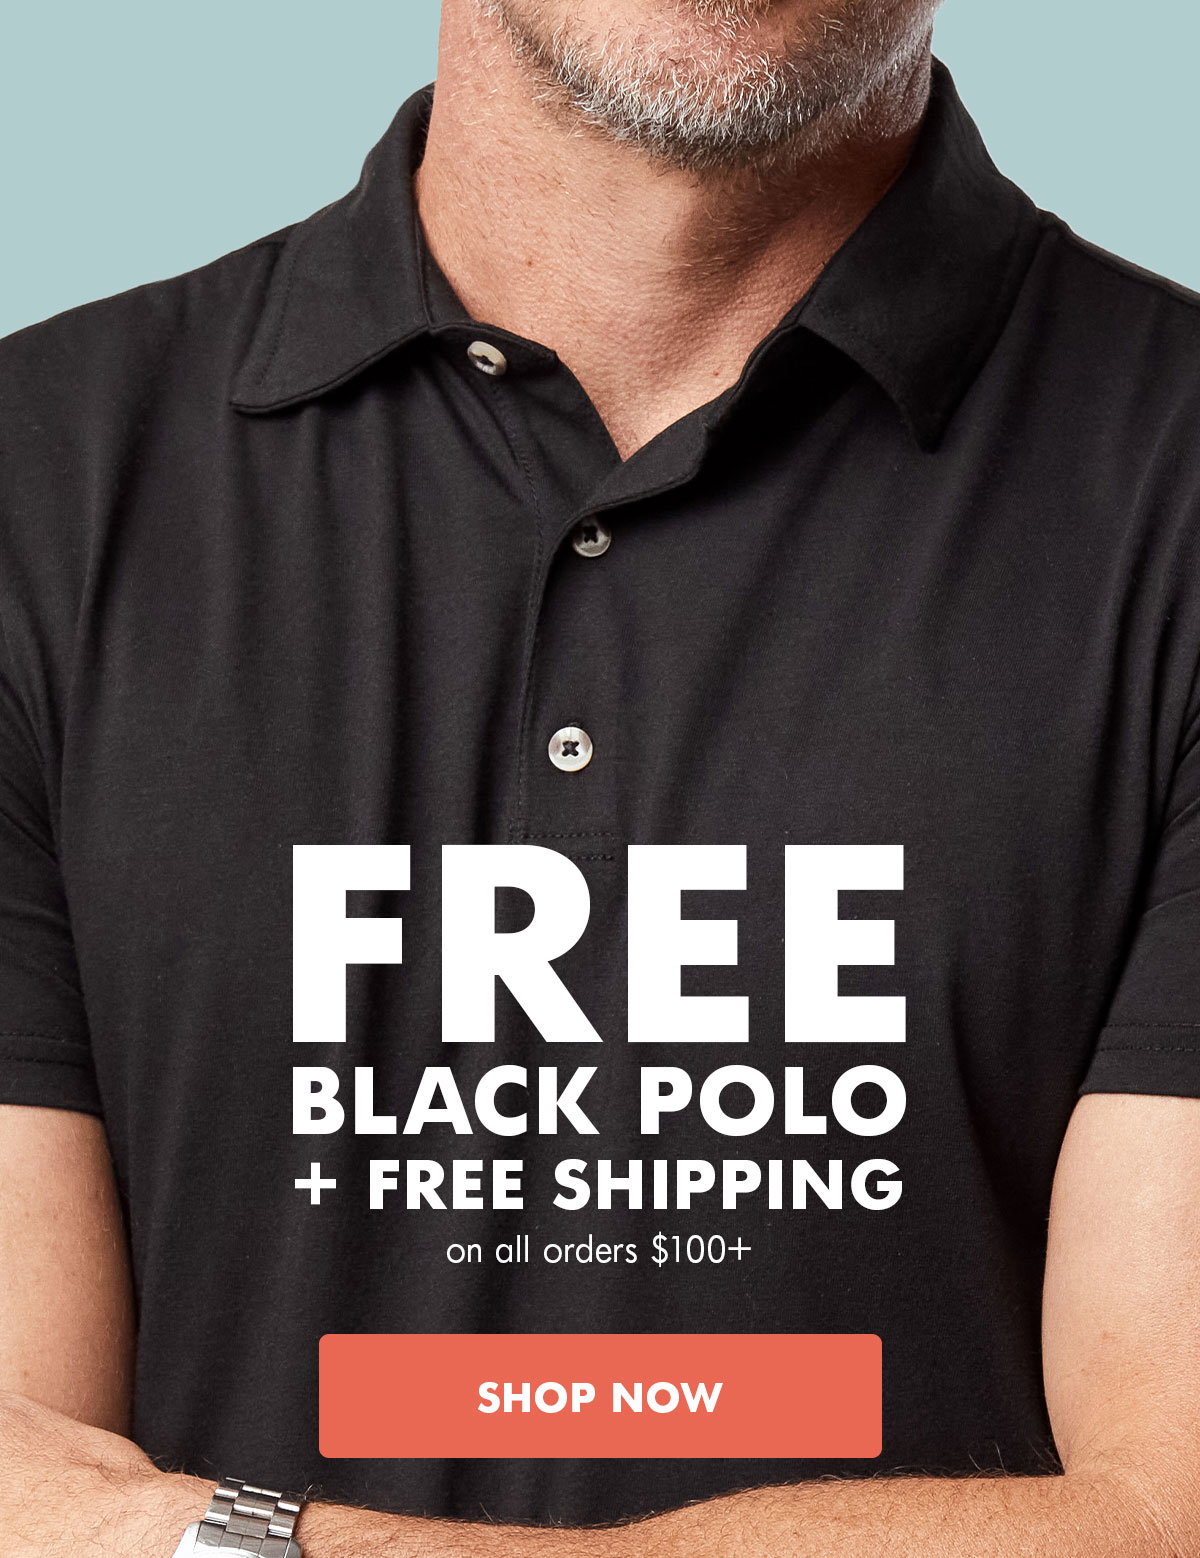 Free black polo and free shipping